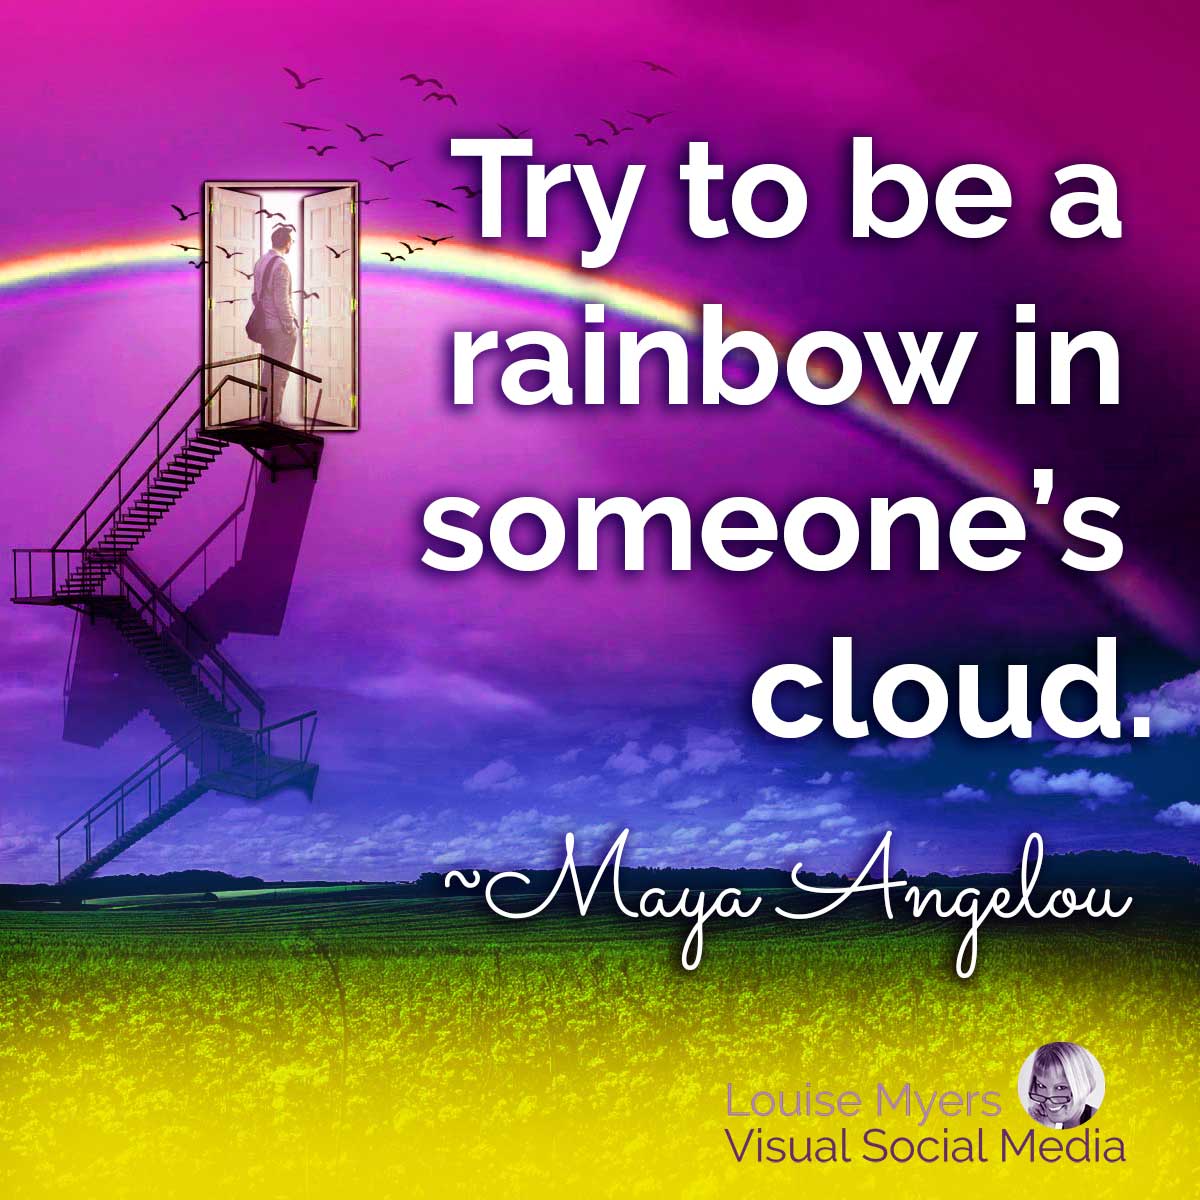 colorful photo collage has Maya Angelou quote, try to b a rainbow in someone's cloud.